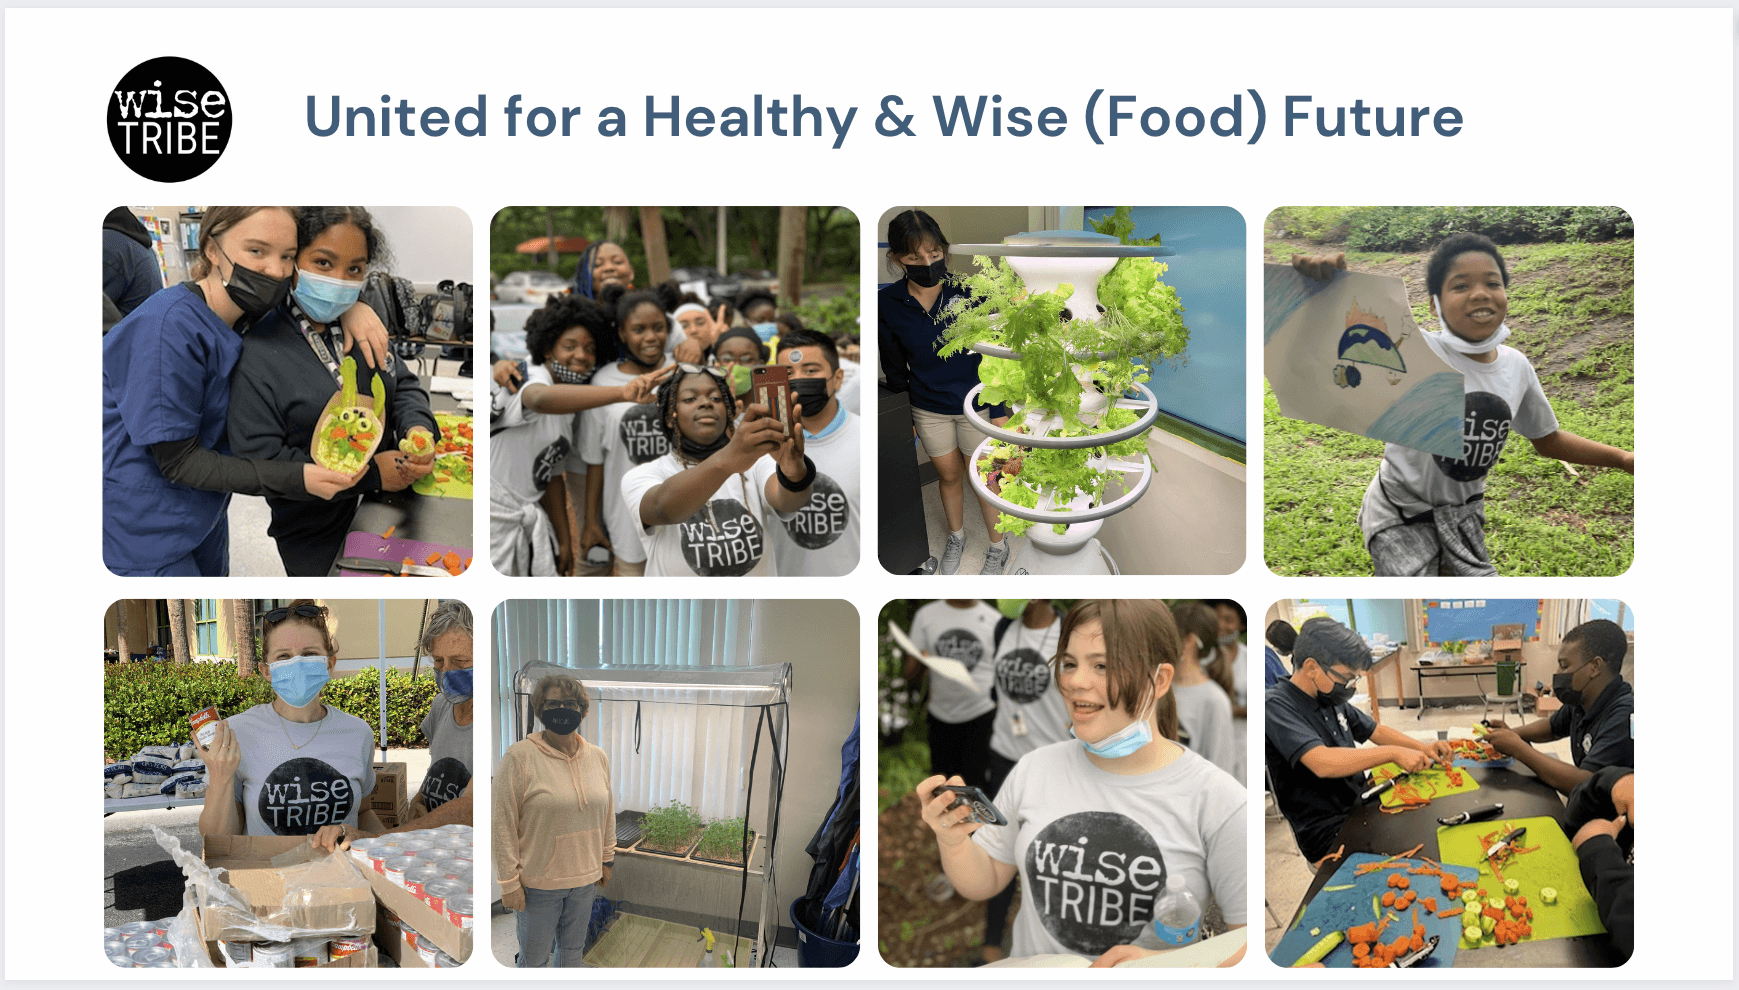 WiseTribe, united for a healthy and wise food future